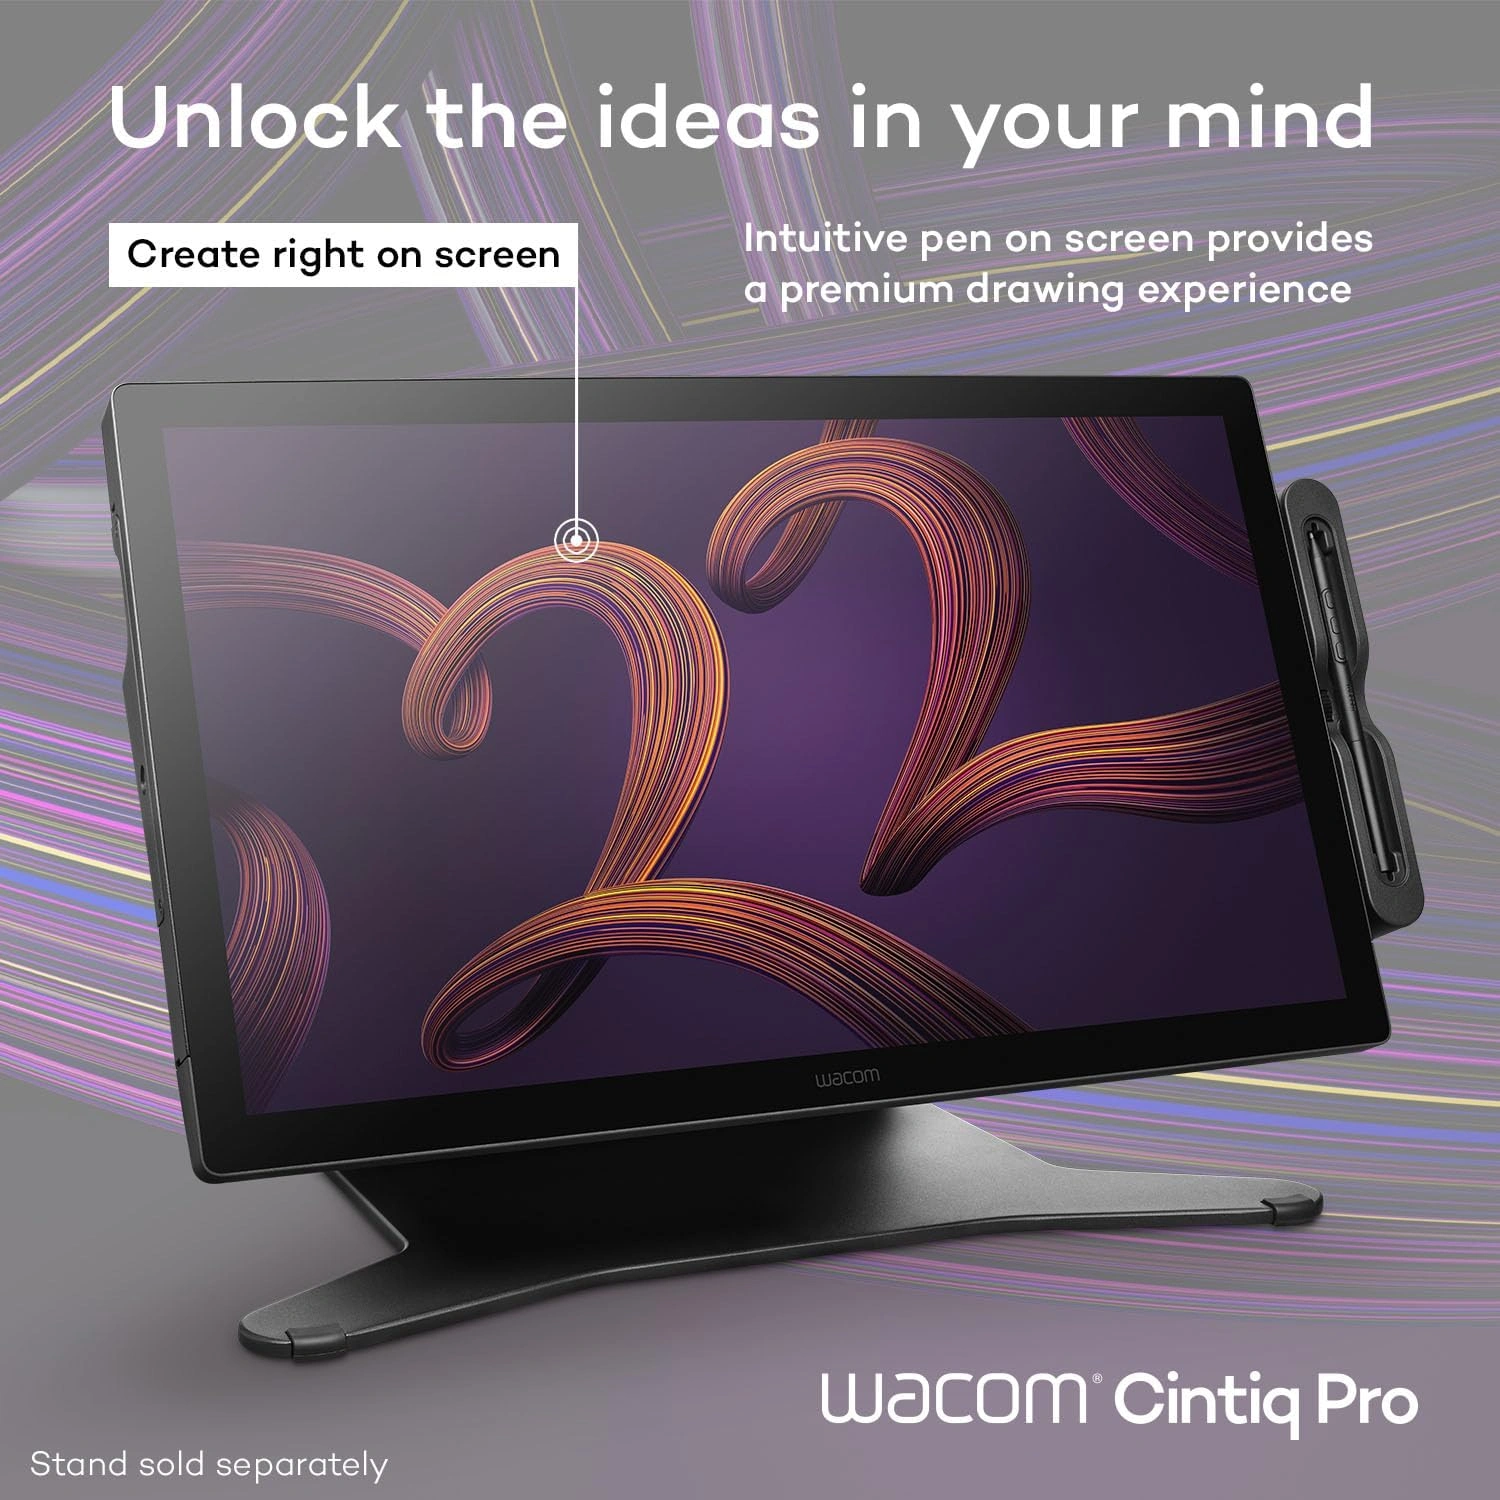 Wacom Cintiq Pro 22 Drawing Tablet with Screen; 4K UHD Touchscreen Graphic Drawing Monitor with 1.07 Billion Colors, 120Hz Refresh Rate &amp; 8192 Pen Pressure for Windows PC, Mac, Linux-1